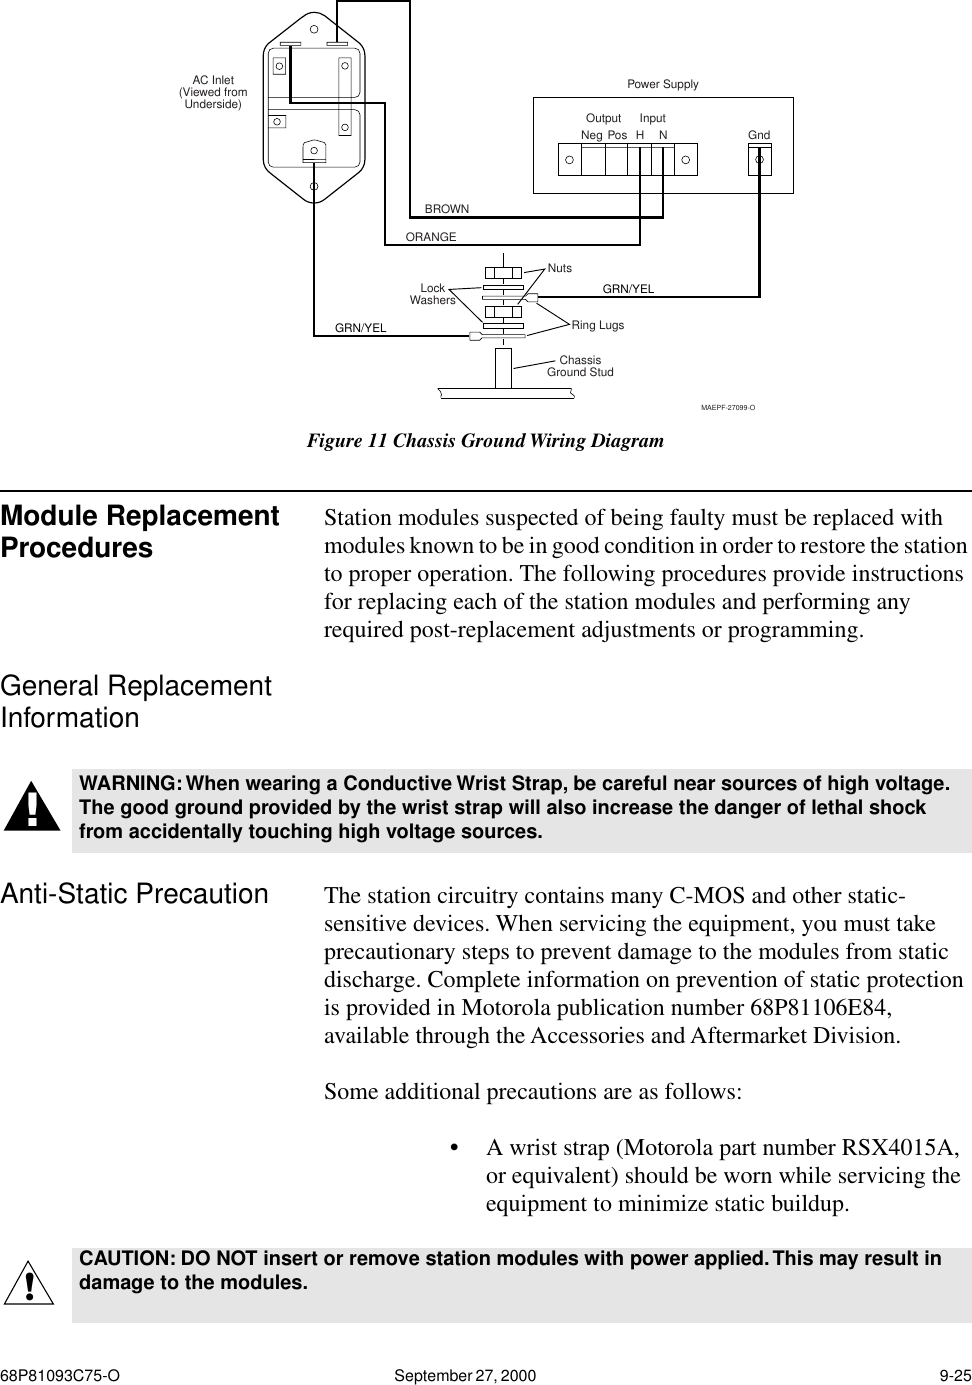 68P81093C75-O September 27, 2000  9-25Module Replacement Procedures Station modules suspected of being faulty must be replaced with modules known to be in good condition in order to restore the station to proper operation. The following procedures provide instructions for replacing each of the station modules and performing any required post-replacement adjustments or programming.General Replacement InformationAnti-Static Precaution The station circuitry contains many C-MOS and other static-sensitive devices. When servicing the equipment, you must take precautionary steps to prevent damage to the modules from static discharge. Complete information on prevention of static protection is provided in Motorola publication number 68P81106E84, available through the Accessories and Aftermarket Division. Some additional precautions are as follows:•A wrist strap (Motorola part number RSX4015A, or equivalent) should be worn while servicing the equipment to minimize static buildup.Figure 11 Chassis Ground Wiring DiagramOutput InputGndNeg Pos HNPower SupplyAC Inlet(Viewed fromUnderside)ChassisGround StudRing LugsNutsLockWashers GRN/YELGRN/YELBROWNORANGEMAEPF-27099-OWARNING: When wearing a Conductive Wrist Strap, be careful near sources of high voltage. The good ground provided by the wrist strap will also increase the danger of lethal shock from accidentally touching high voltage sources.!CAUTION: DO NOT insert or remove station modules with power applied. This may result in damage to the modules.!